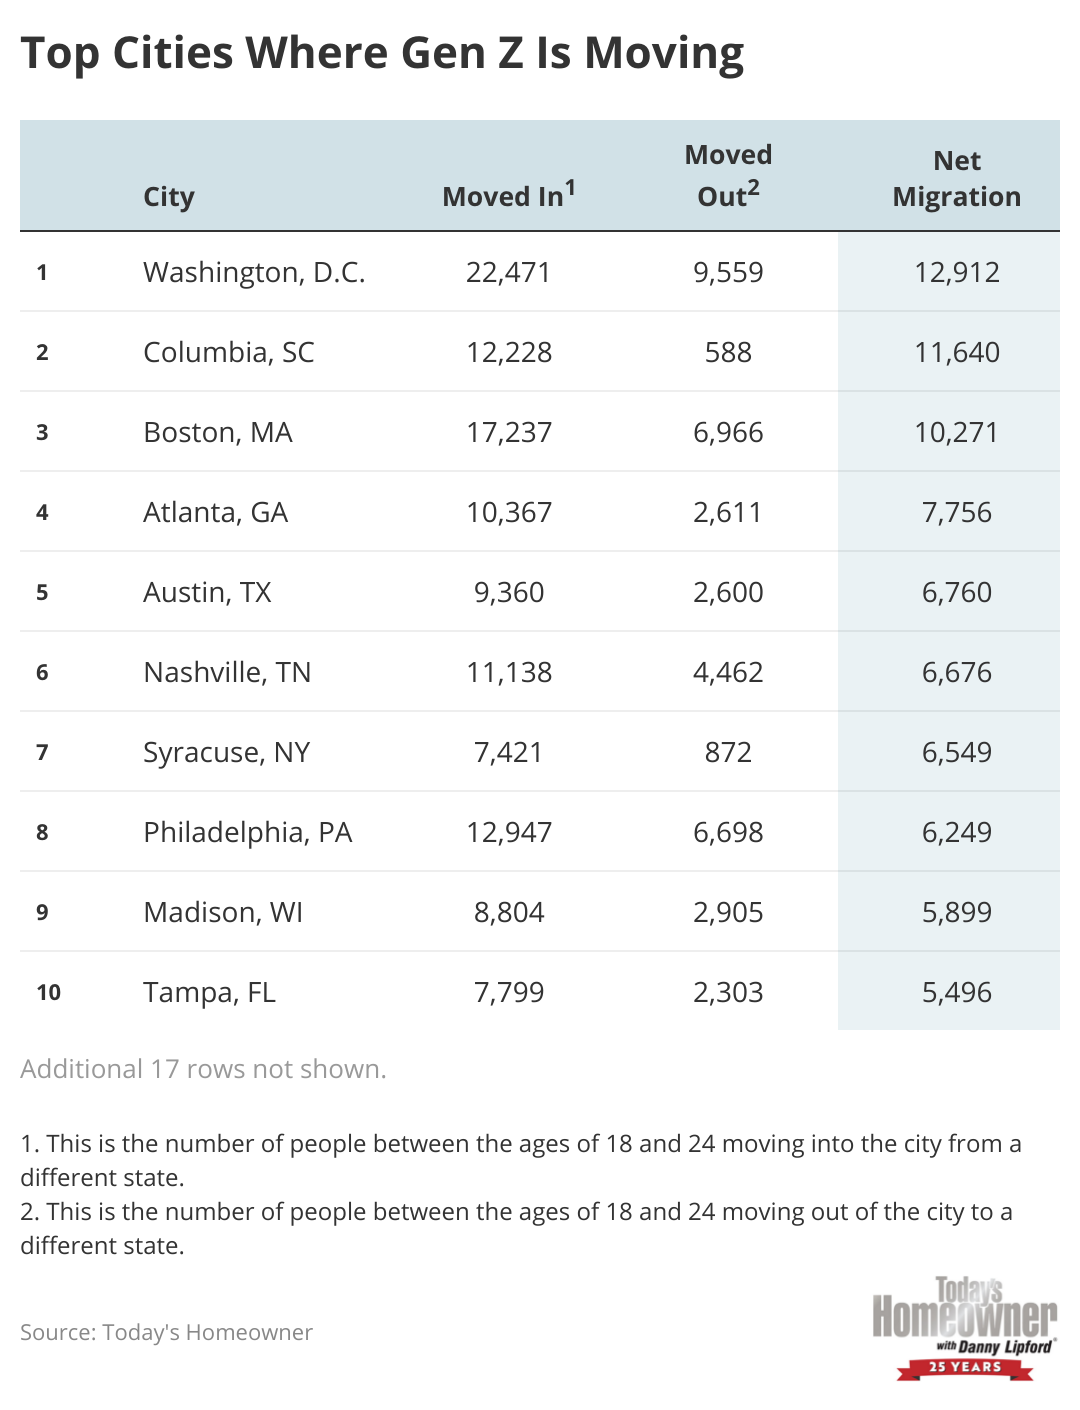 Chart showing the top cities where Gen Z is moving.